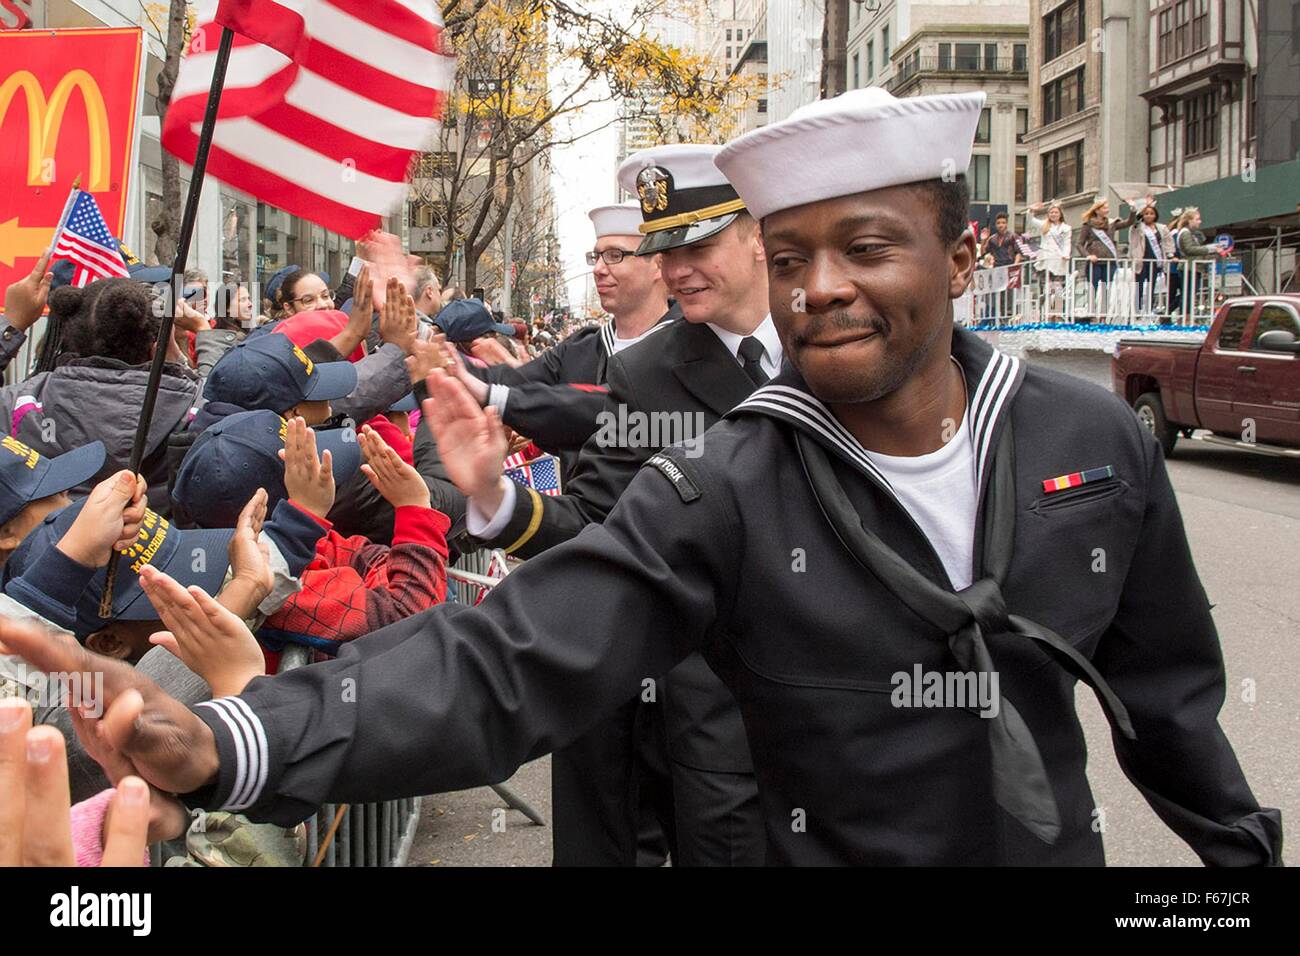 The U.S. Navy Sailors from the amphibious transport dock ship USS New York greet people gathered for the annual Veterans Day parade during Veterans Week November 11, 2015 in New York City, NY. Stock Photo